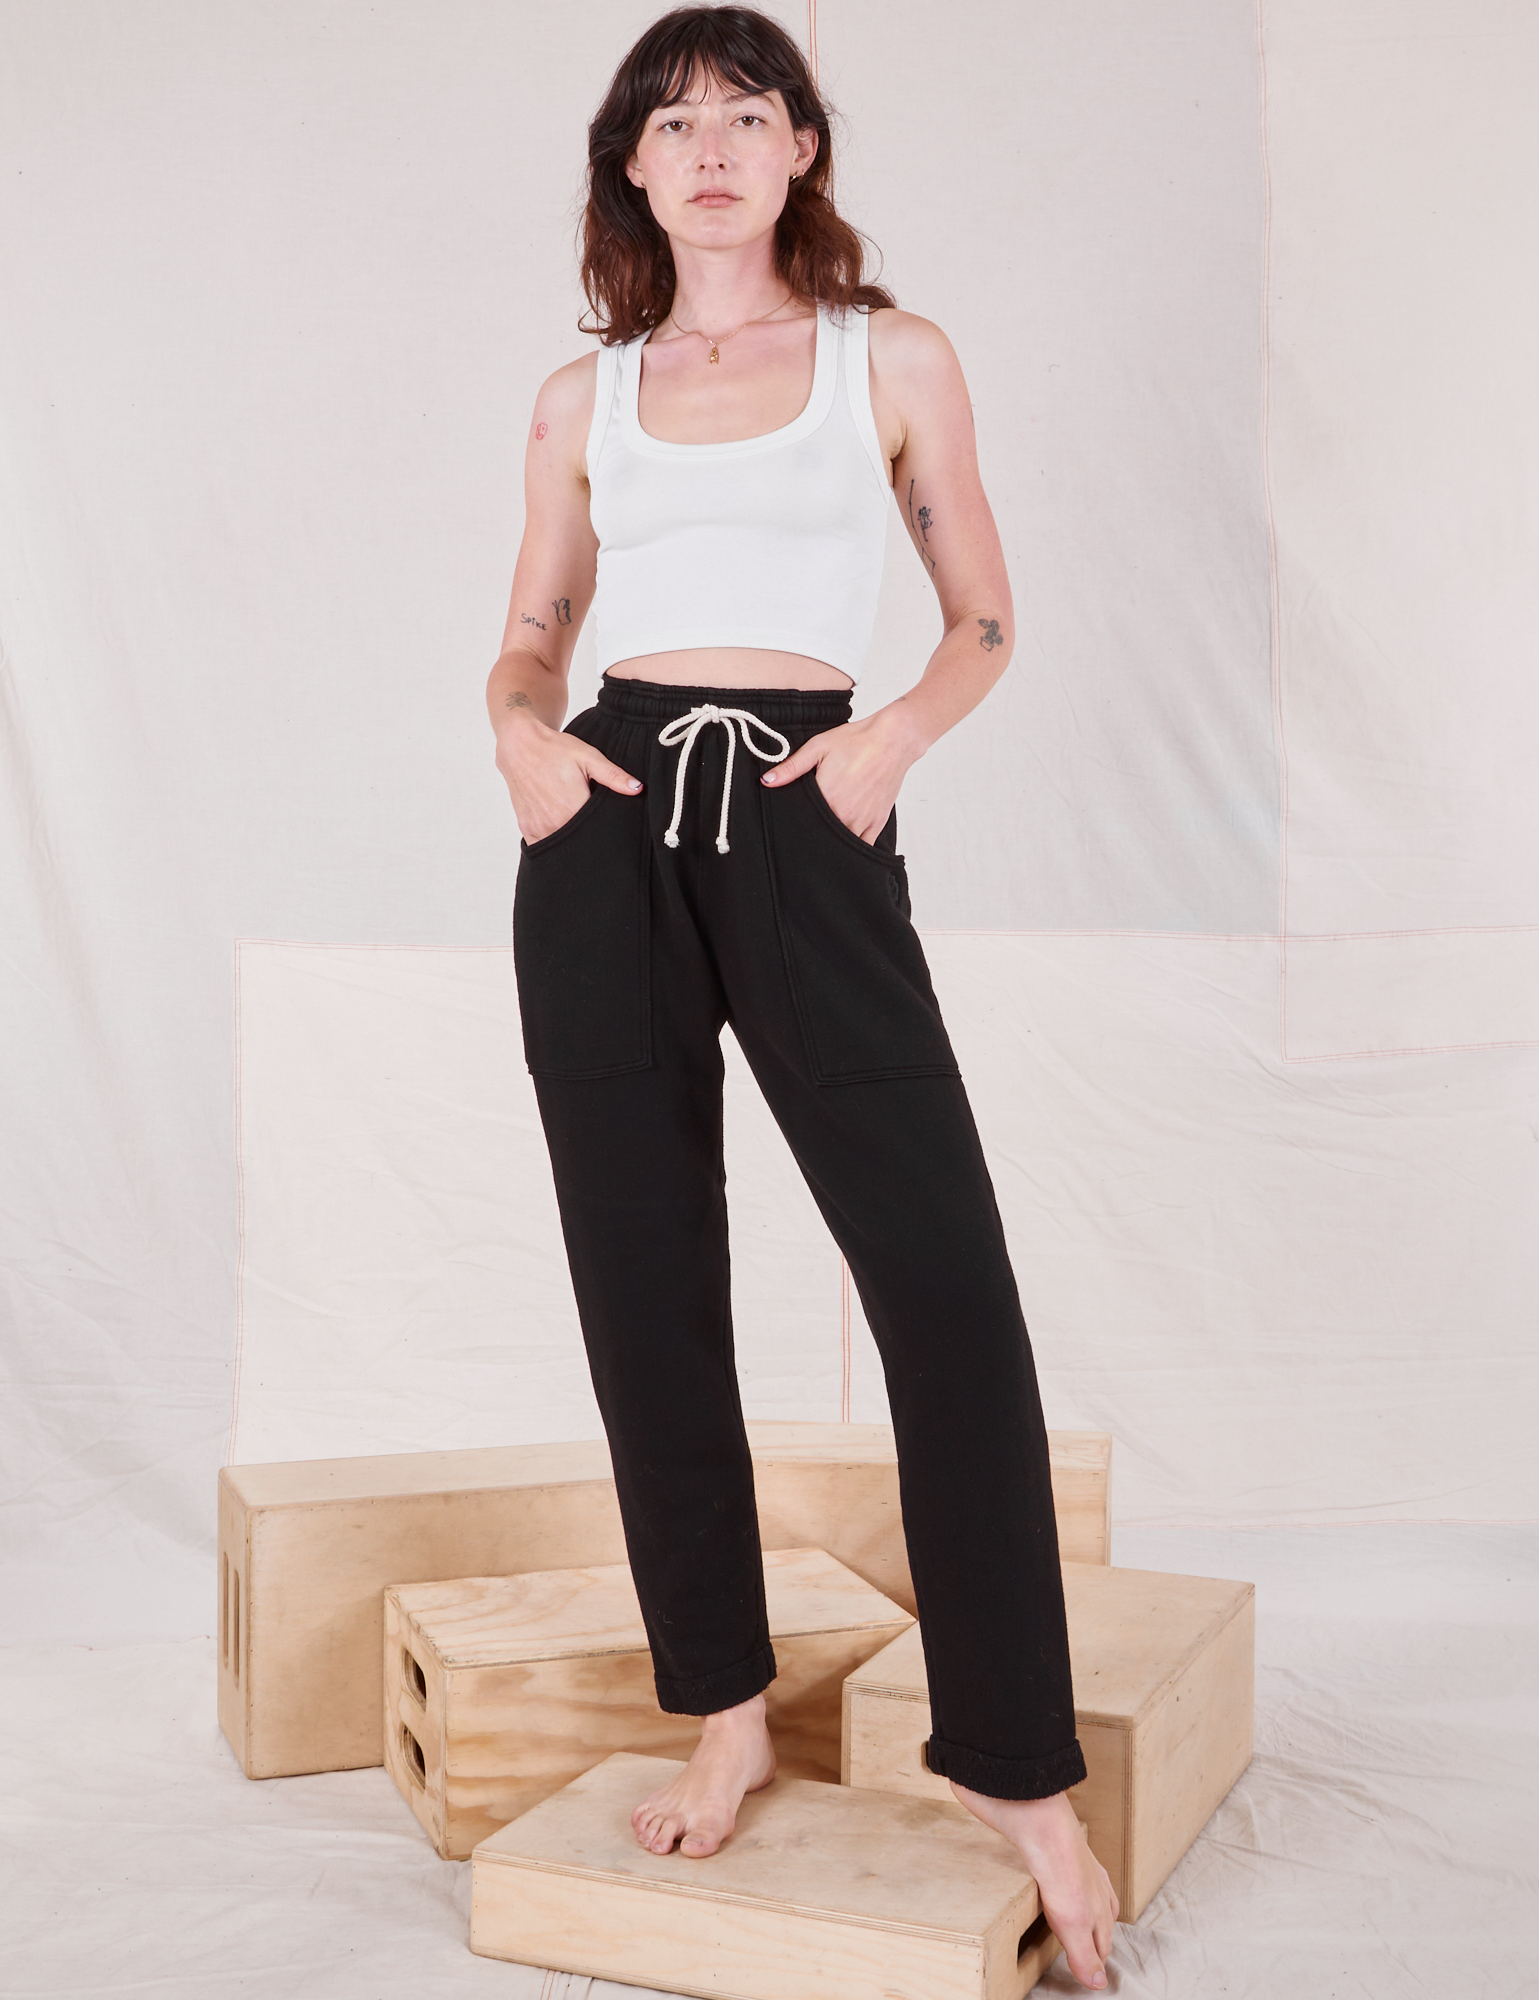 Alex is 5&#39;8&quot; and wearing P Rolled Cuff Sweat Pants in Basic Black paired with vintage off-white Cropped Tank